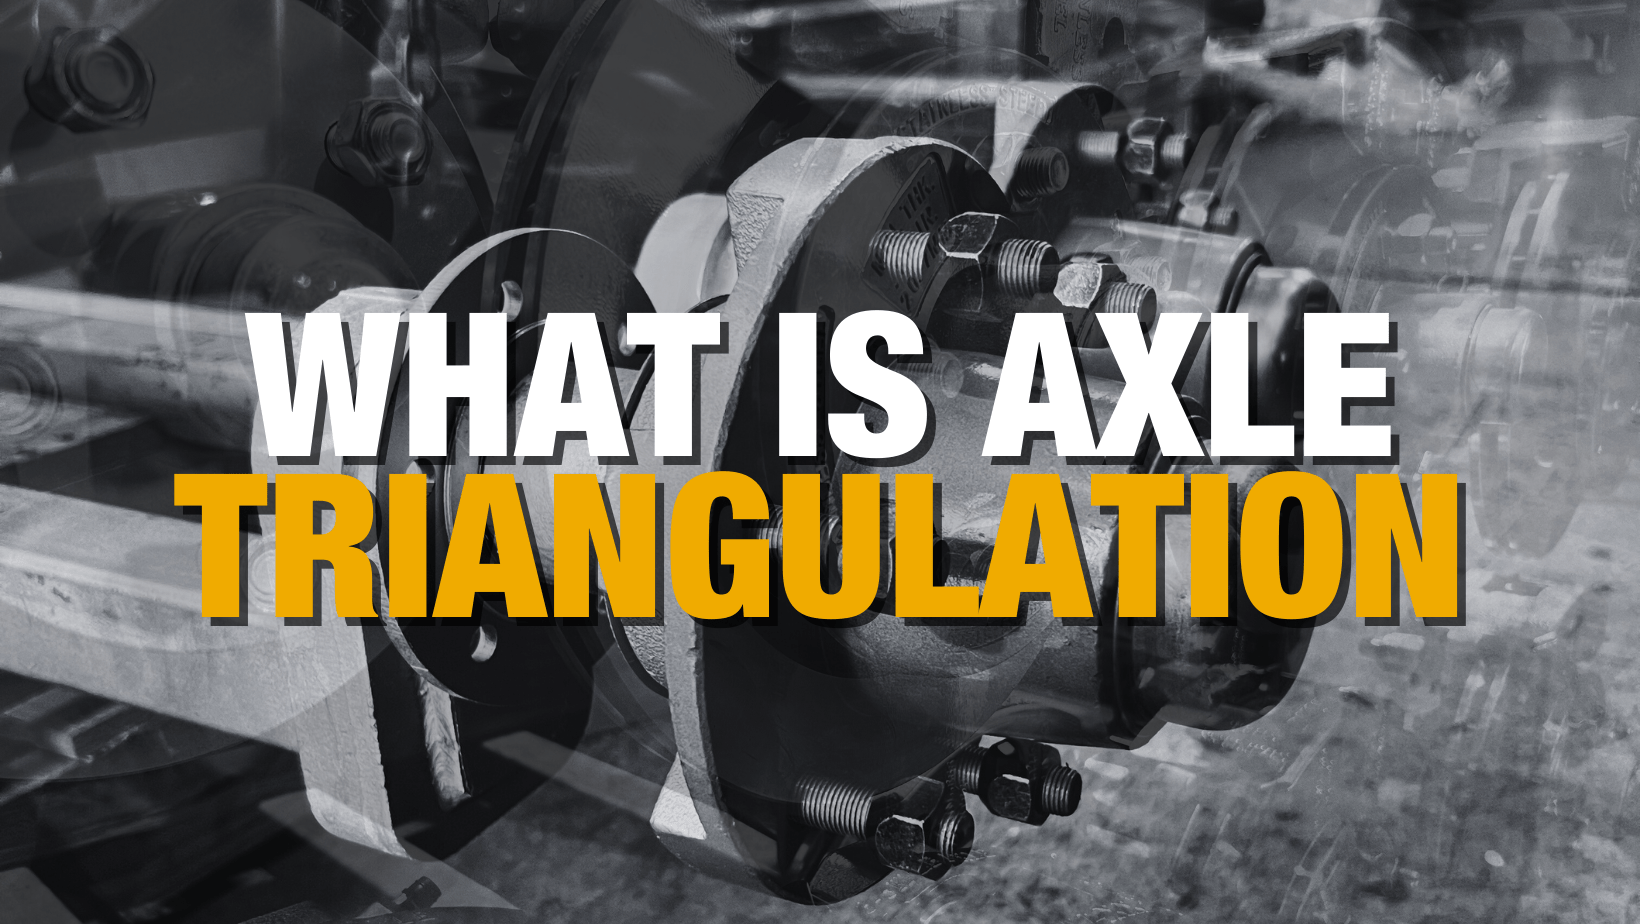 Learn about axle triangulation for trailers and caravans